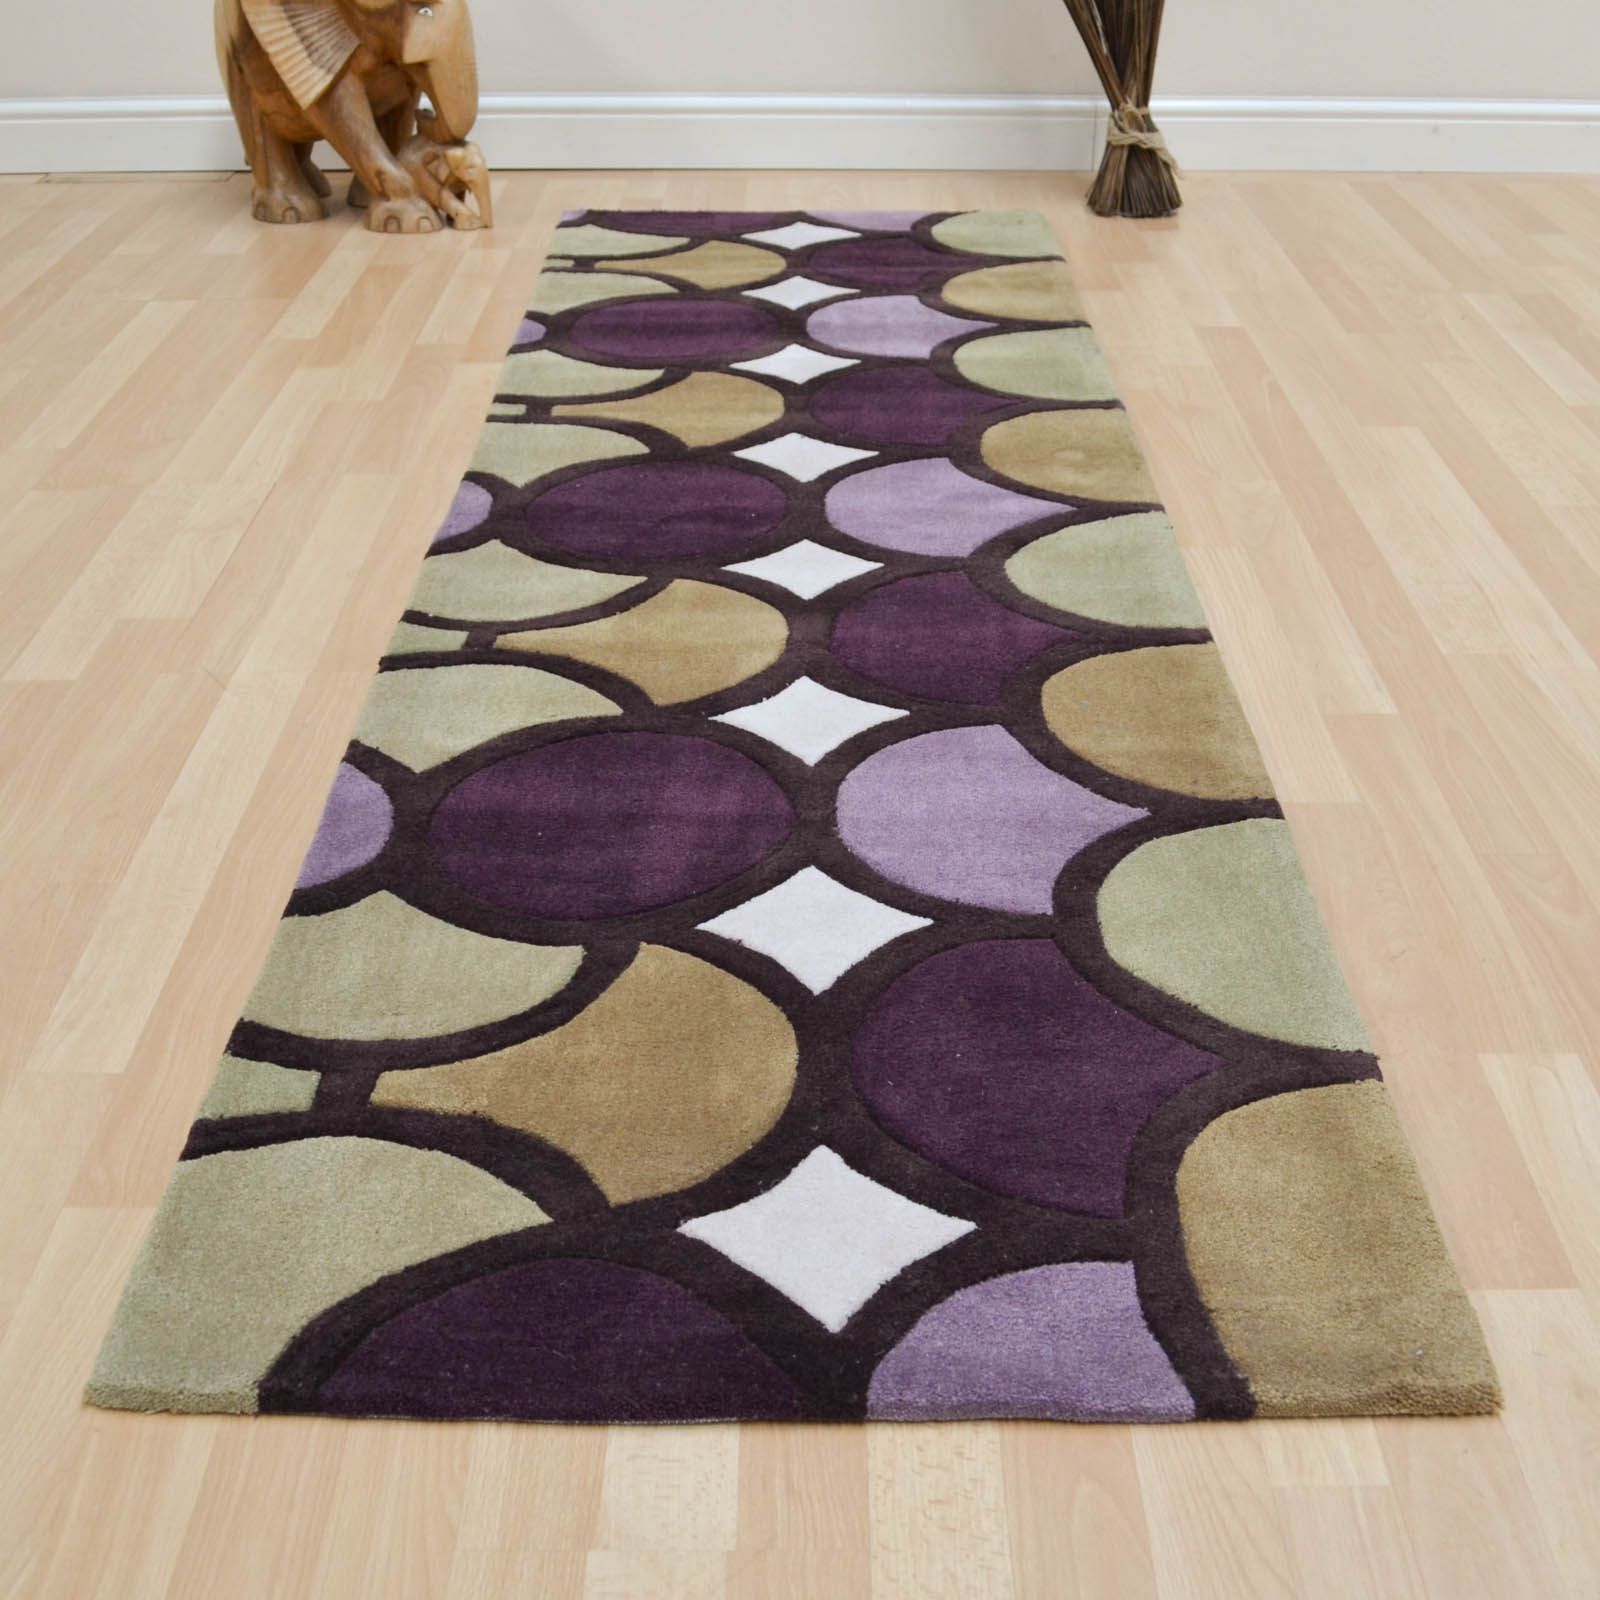 Cozy Hallway Runner Rugs Uk 100 Hallway Runner Rugs Uk Very Long Intended For Hall Runners And Matching Rugs (View 4 of 20)